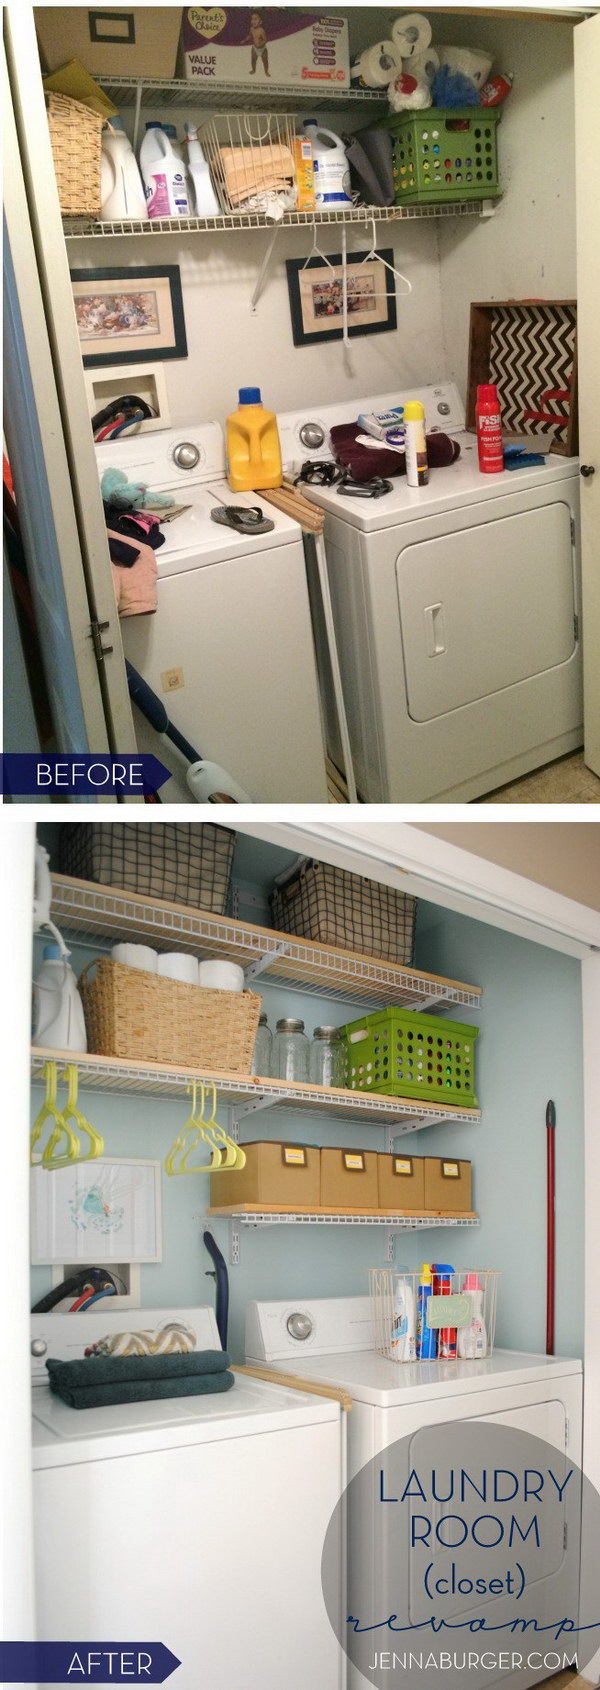 DIY Laundry Revamp with More Open Sheving Storage. 